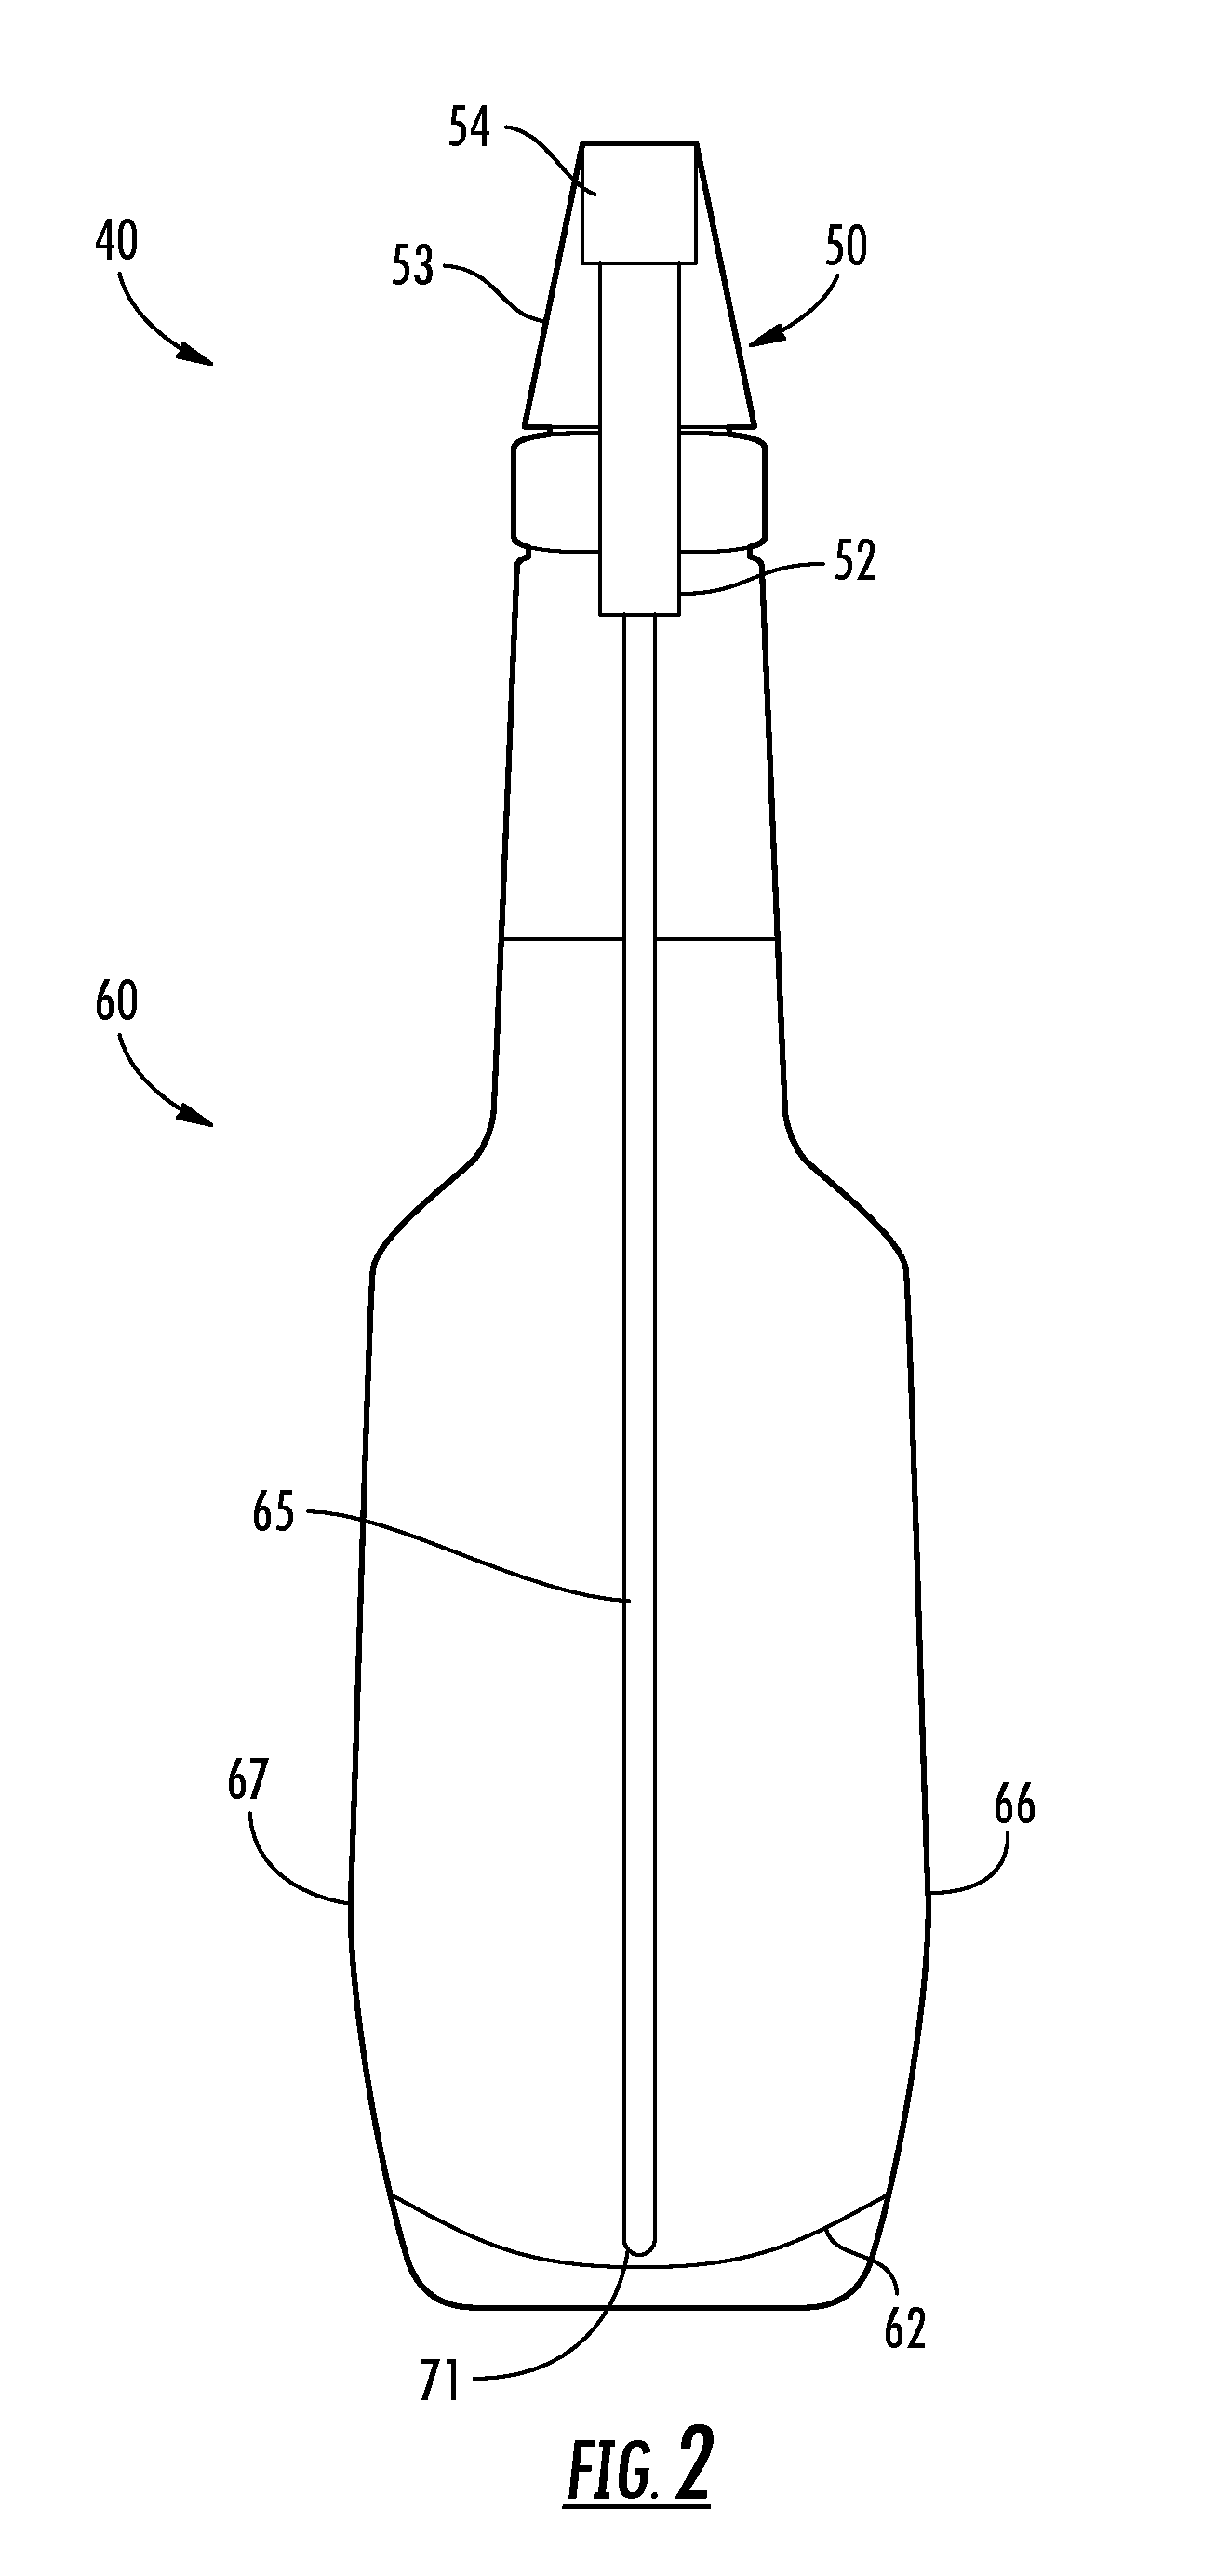 Liquid spray bottle with integrally molded liquid passageway and related methods